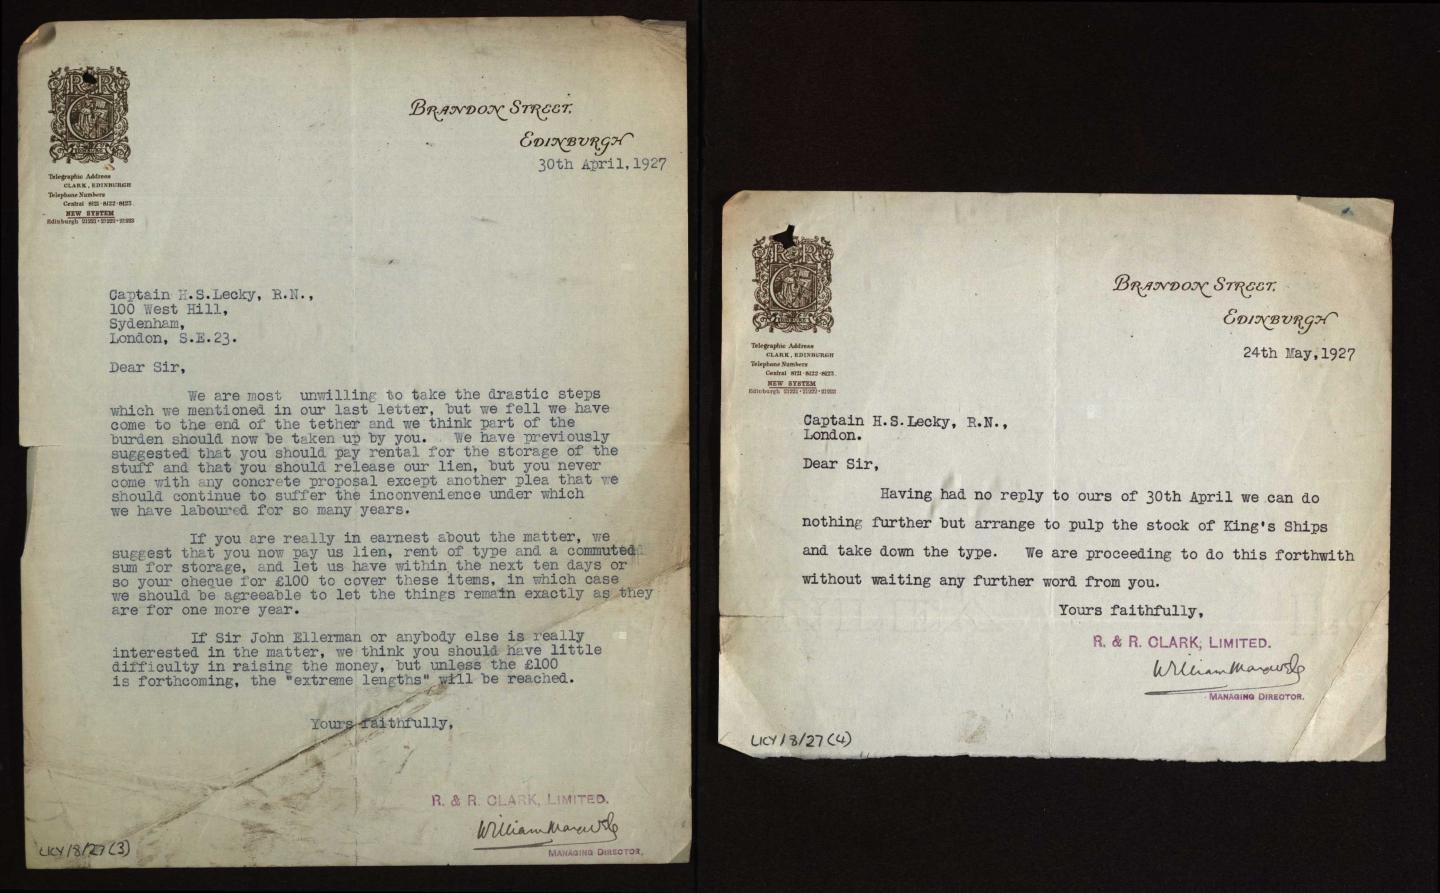 Final two letters to Lecky from the printers R. & R. Clark Ltd, (LKY/8/27(3) and (4))